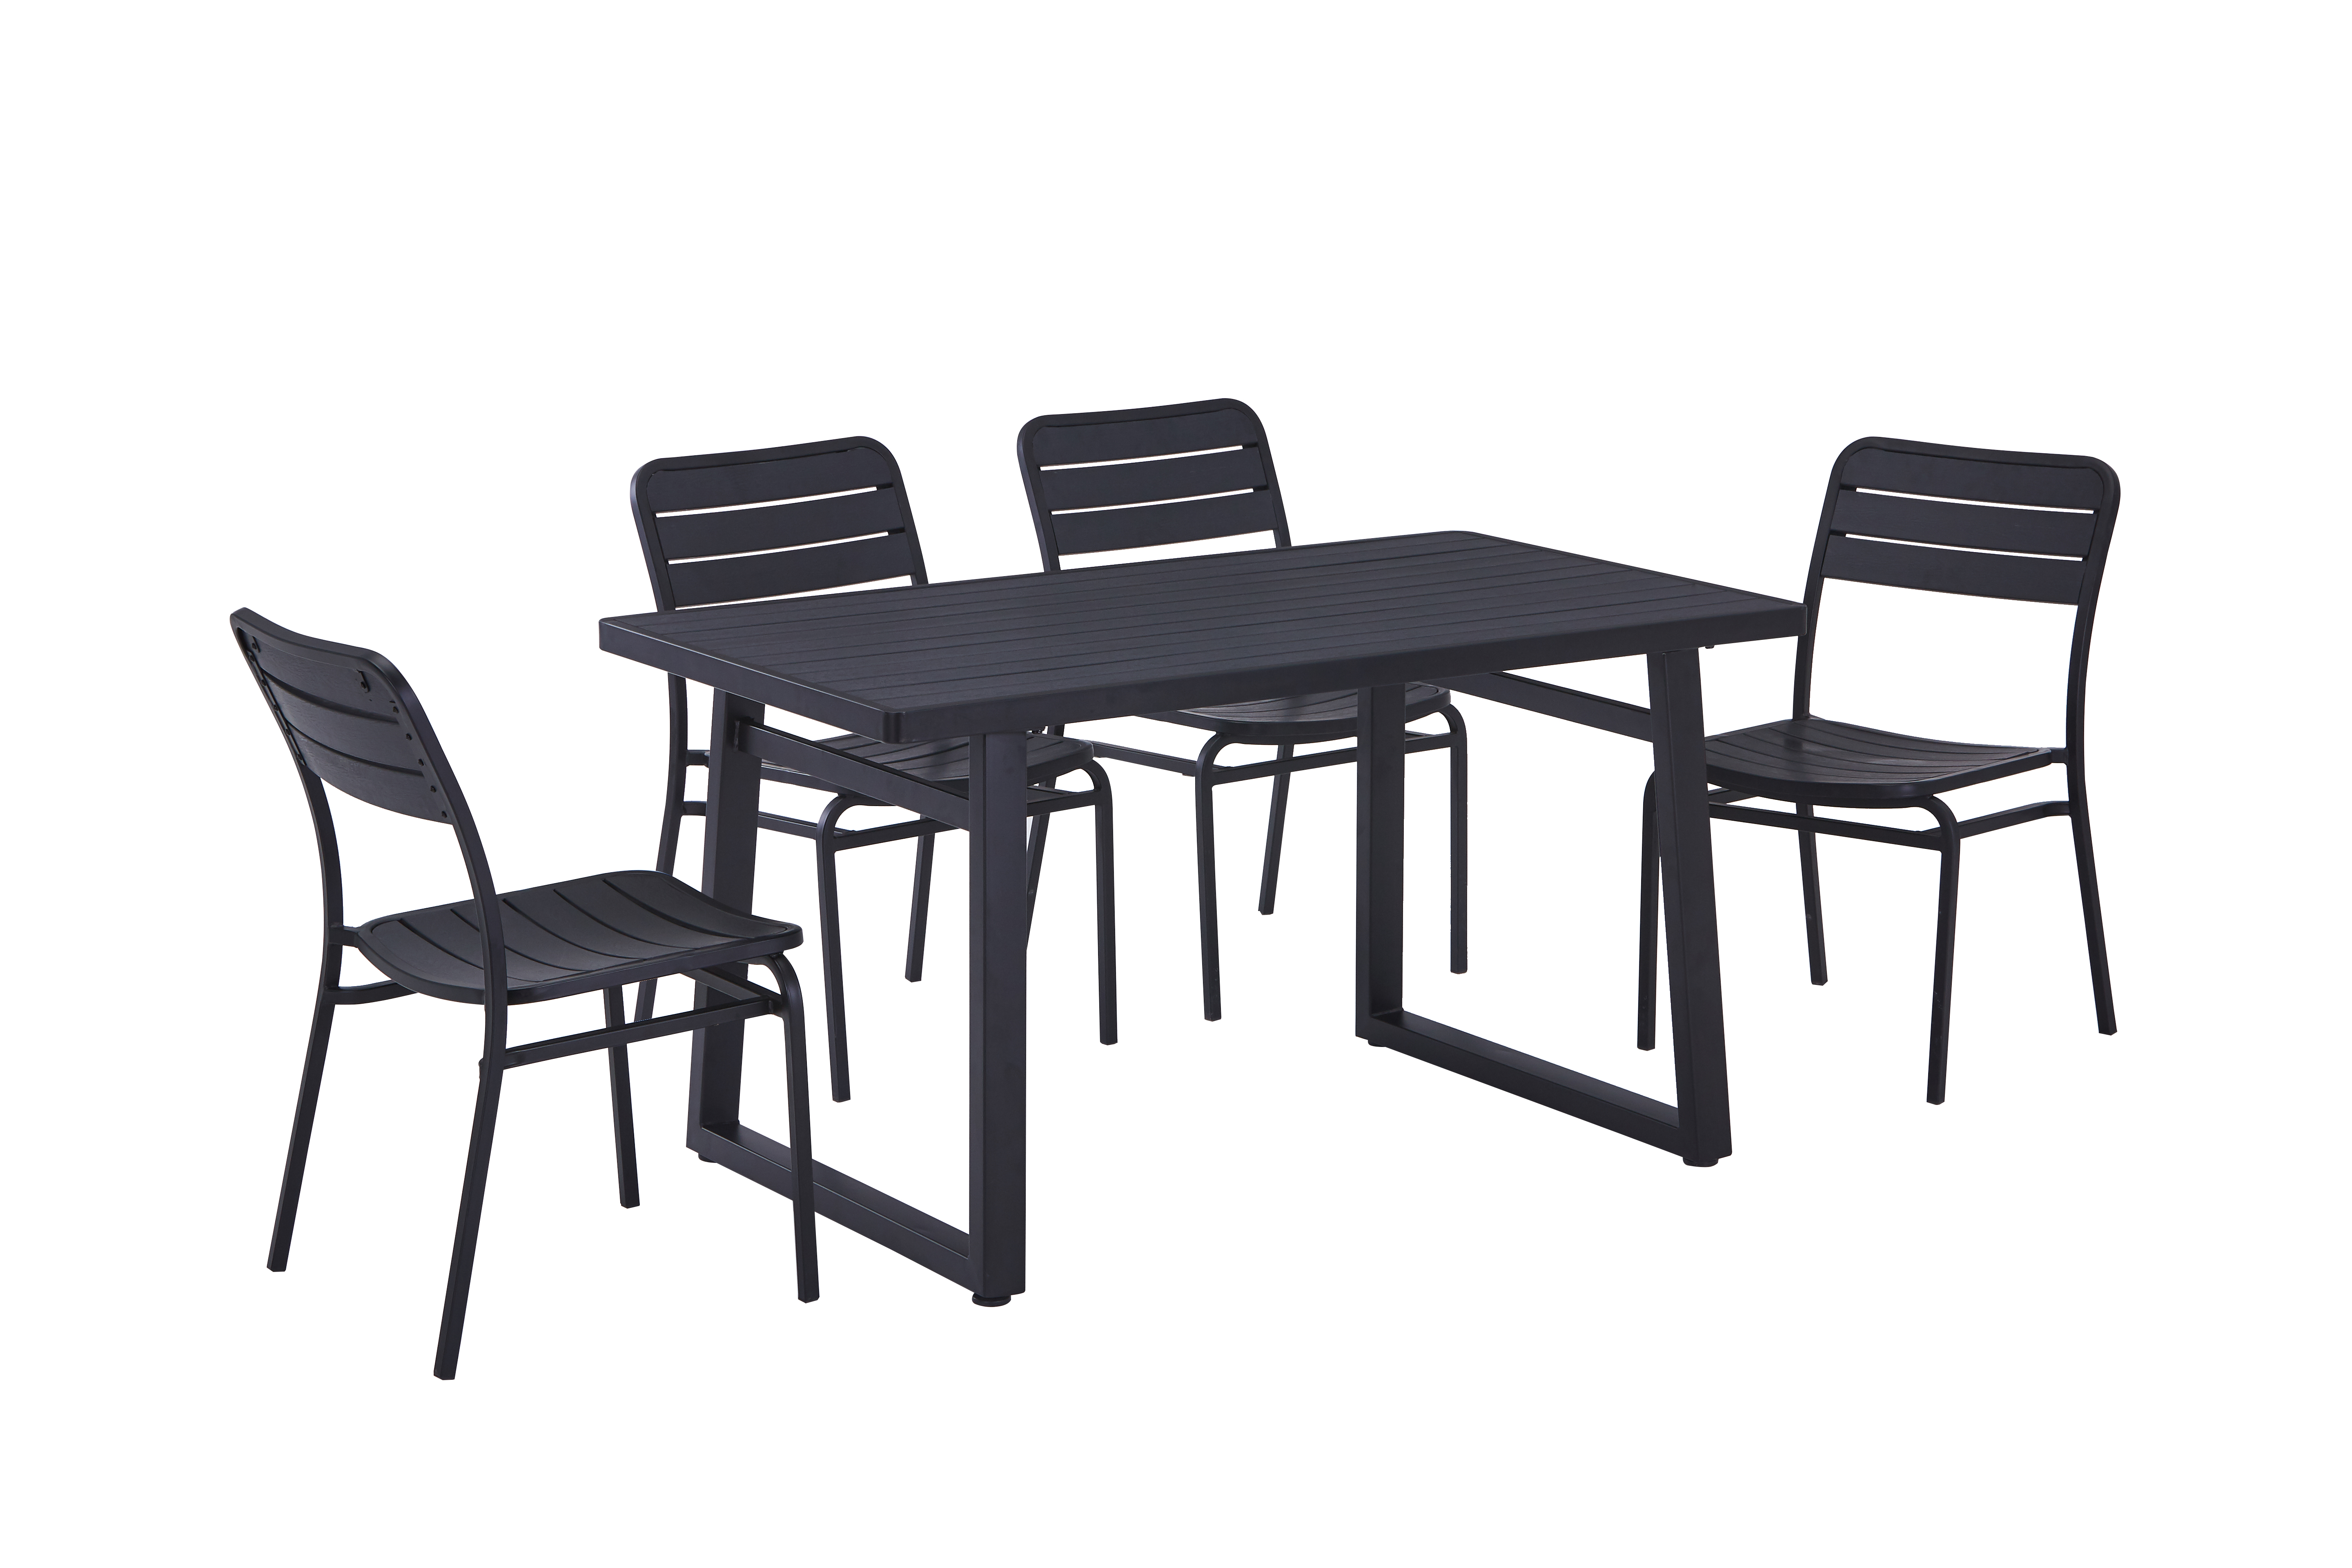 Steel & Plastic Wood Table and Chairs Set